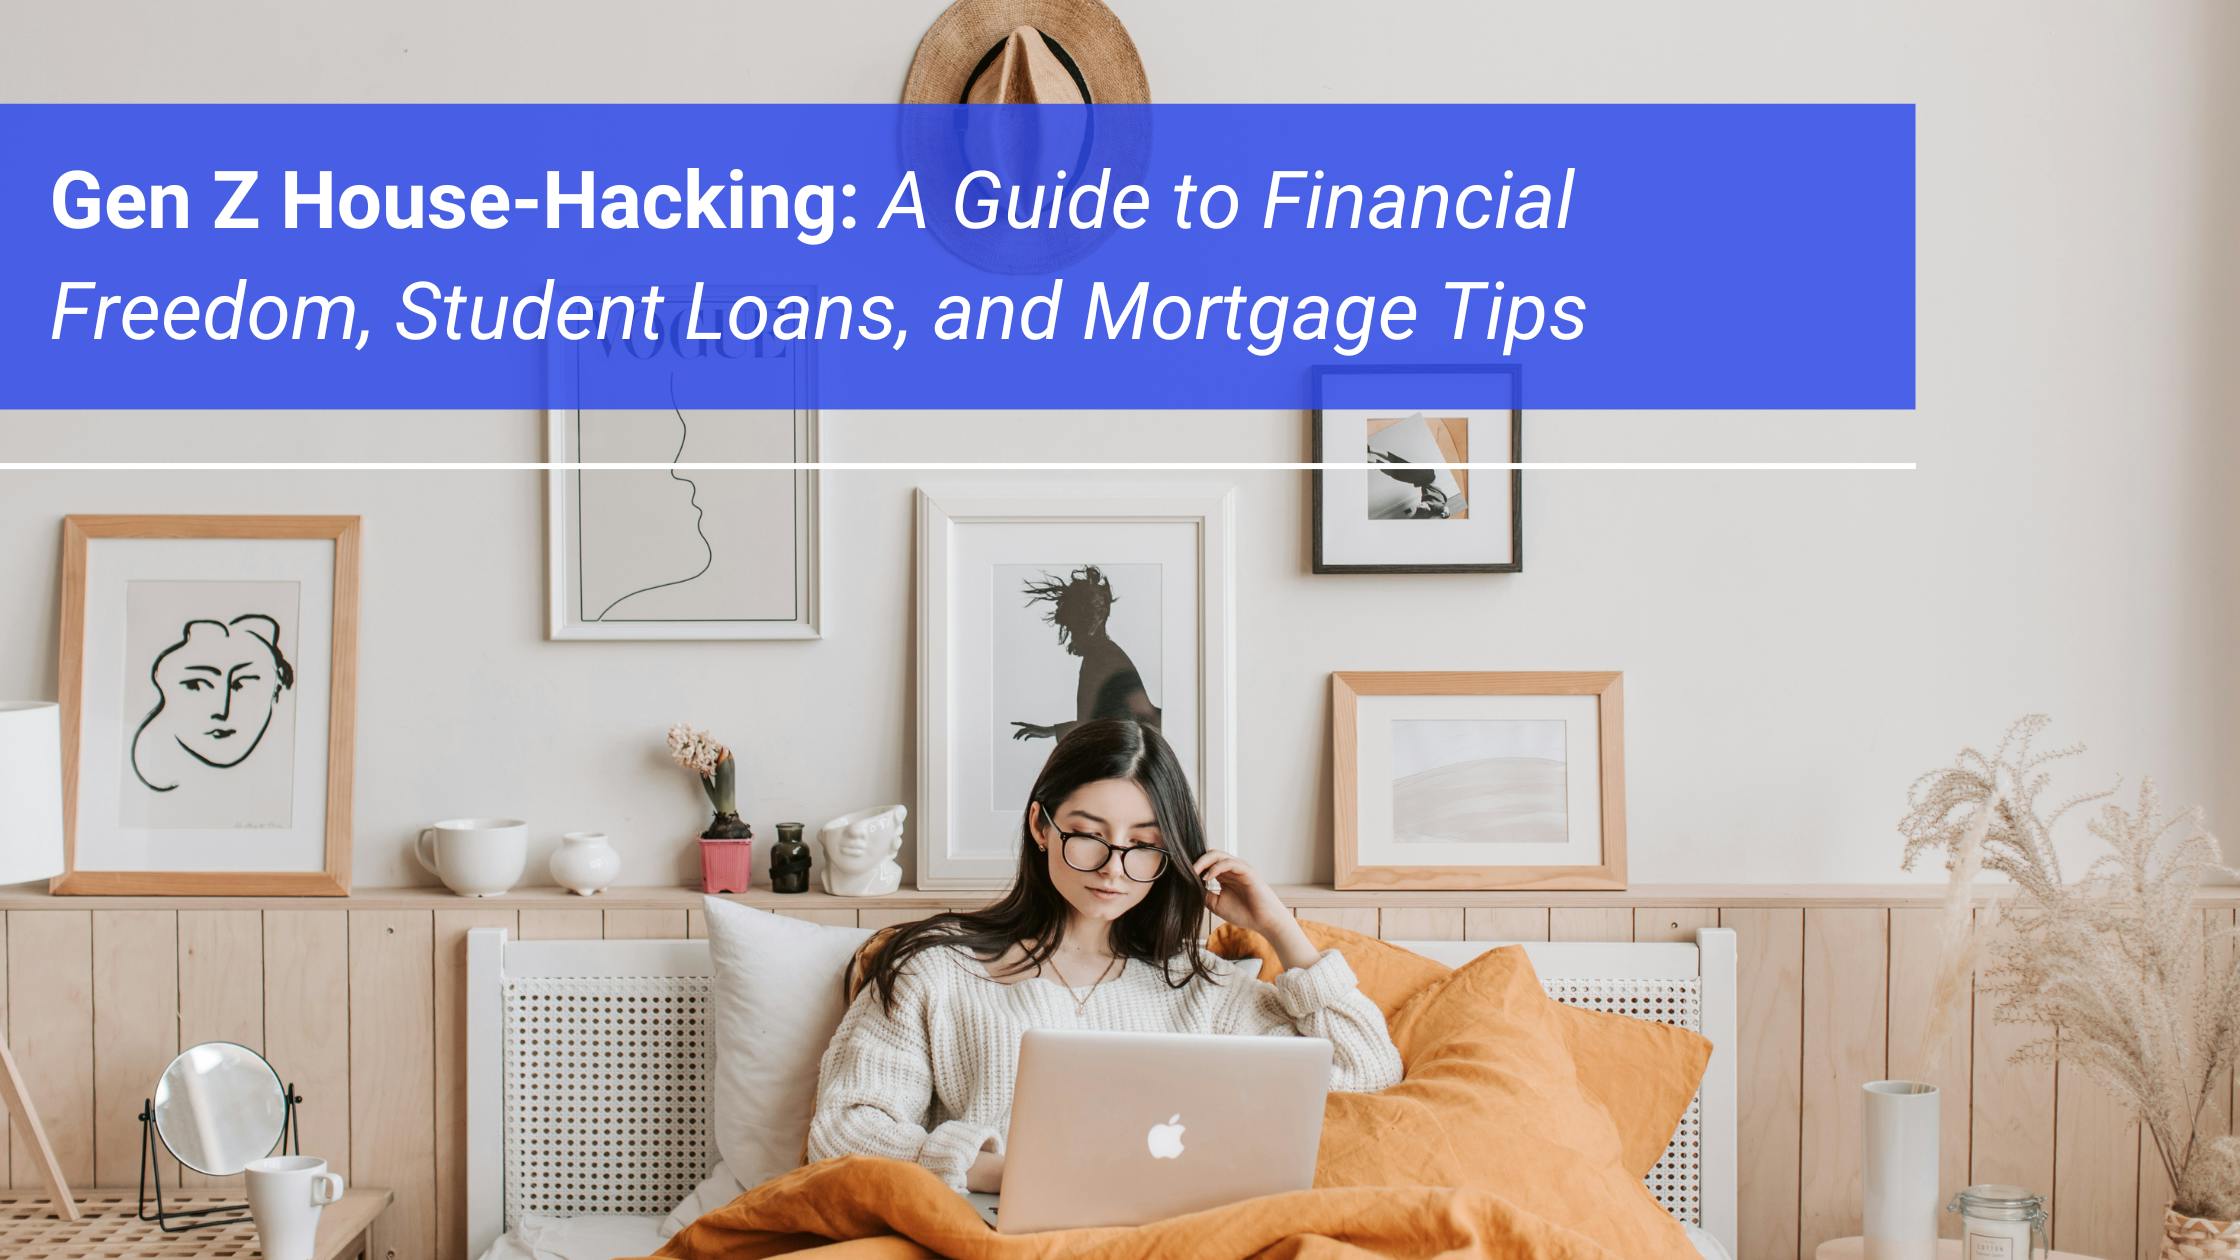 Gen Z House-Hacking: A Guide to Financial Freedom, Student Loans, and Mortgage Tips